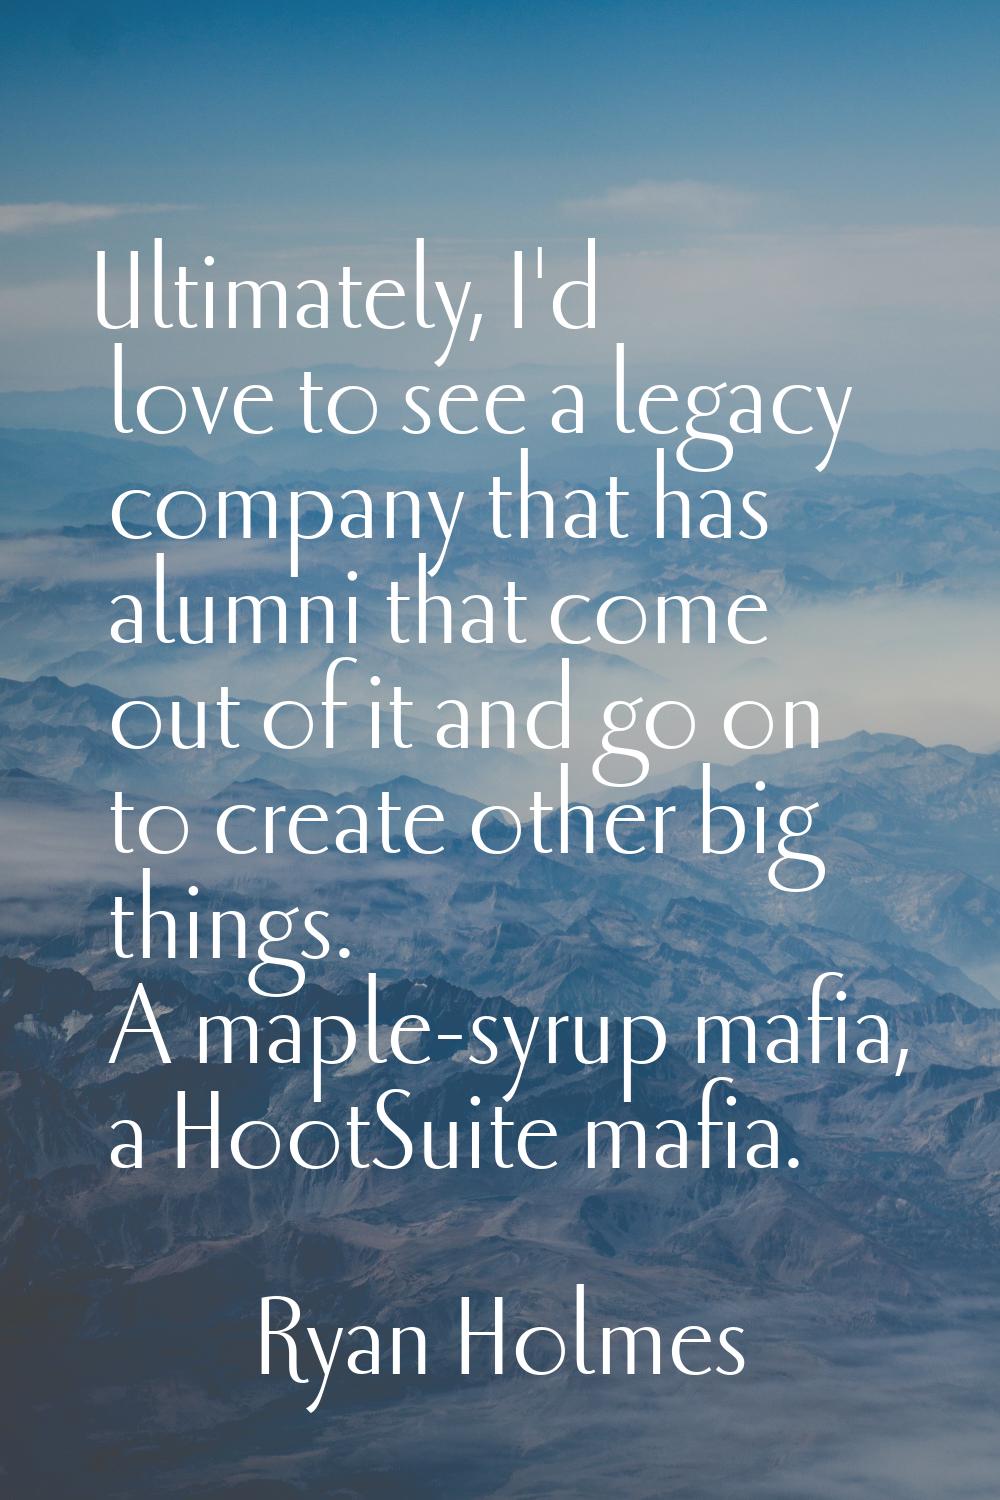 Ultimately, I'd love to see a legacy company that has alumni that come out of it and go on to creat